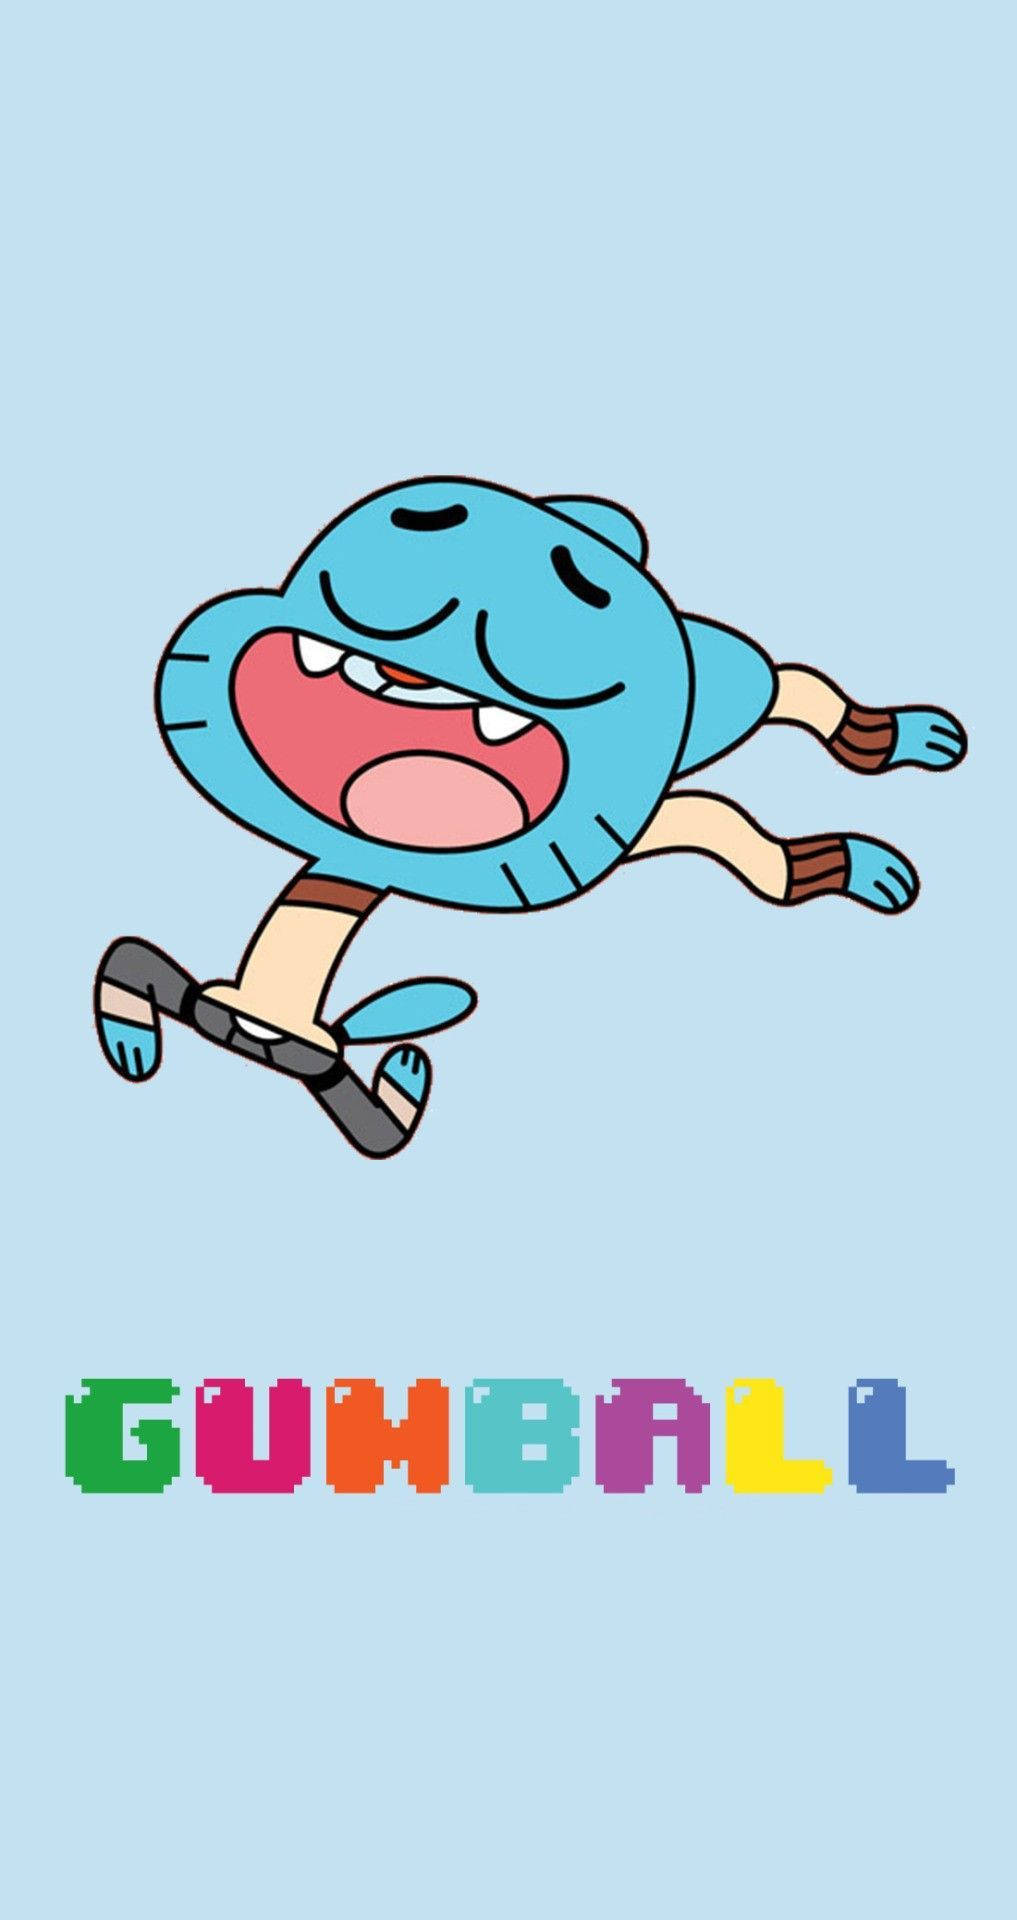 "Gumballs and lollipops in every hue of the rainbow!" Wallpaper